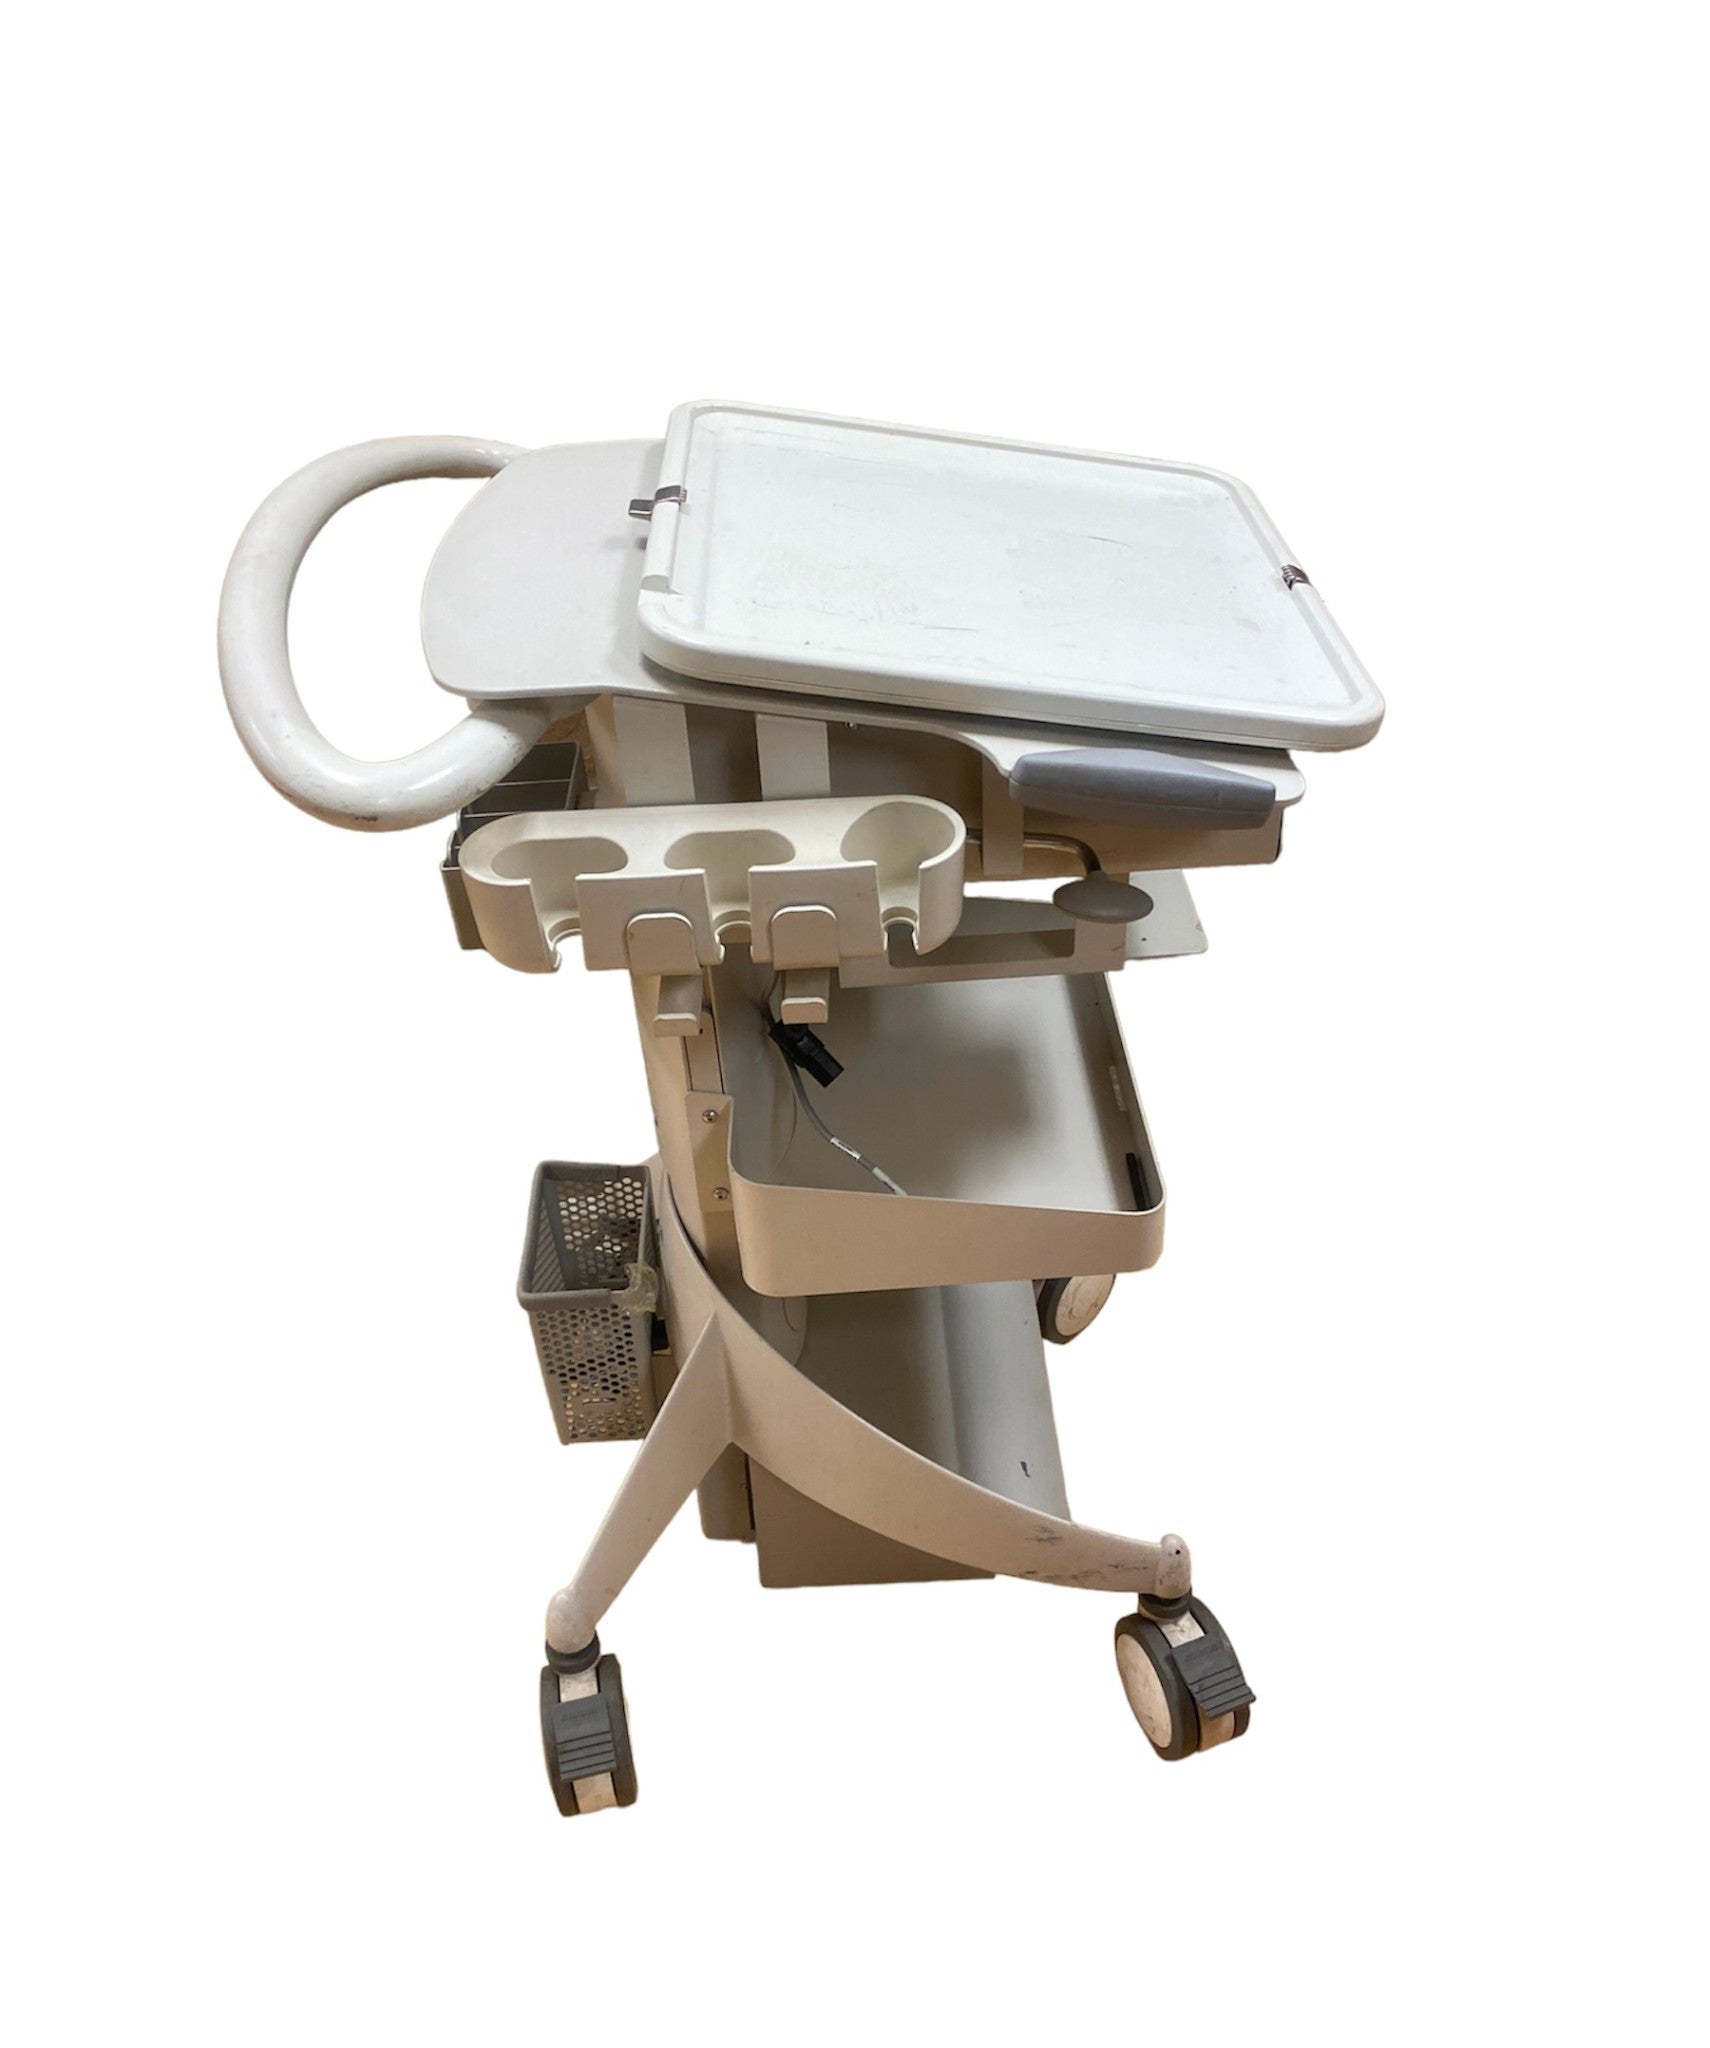 Cart for Philips CX50 Ultrasound Machine